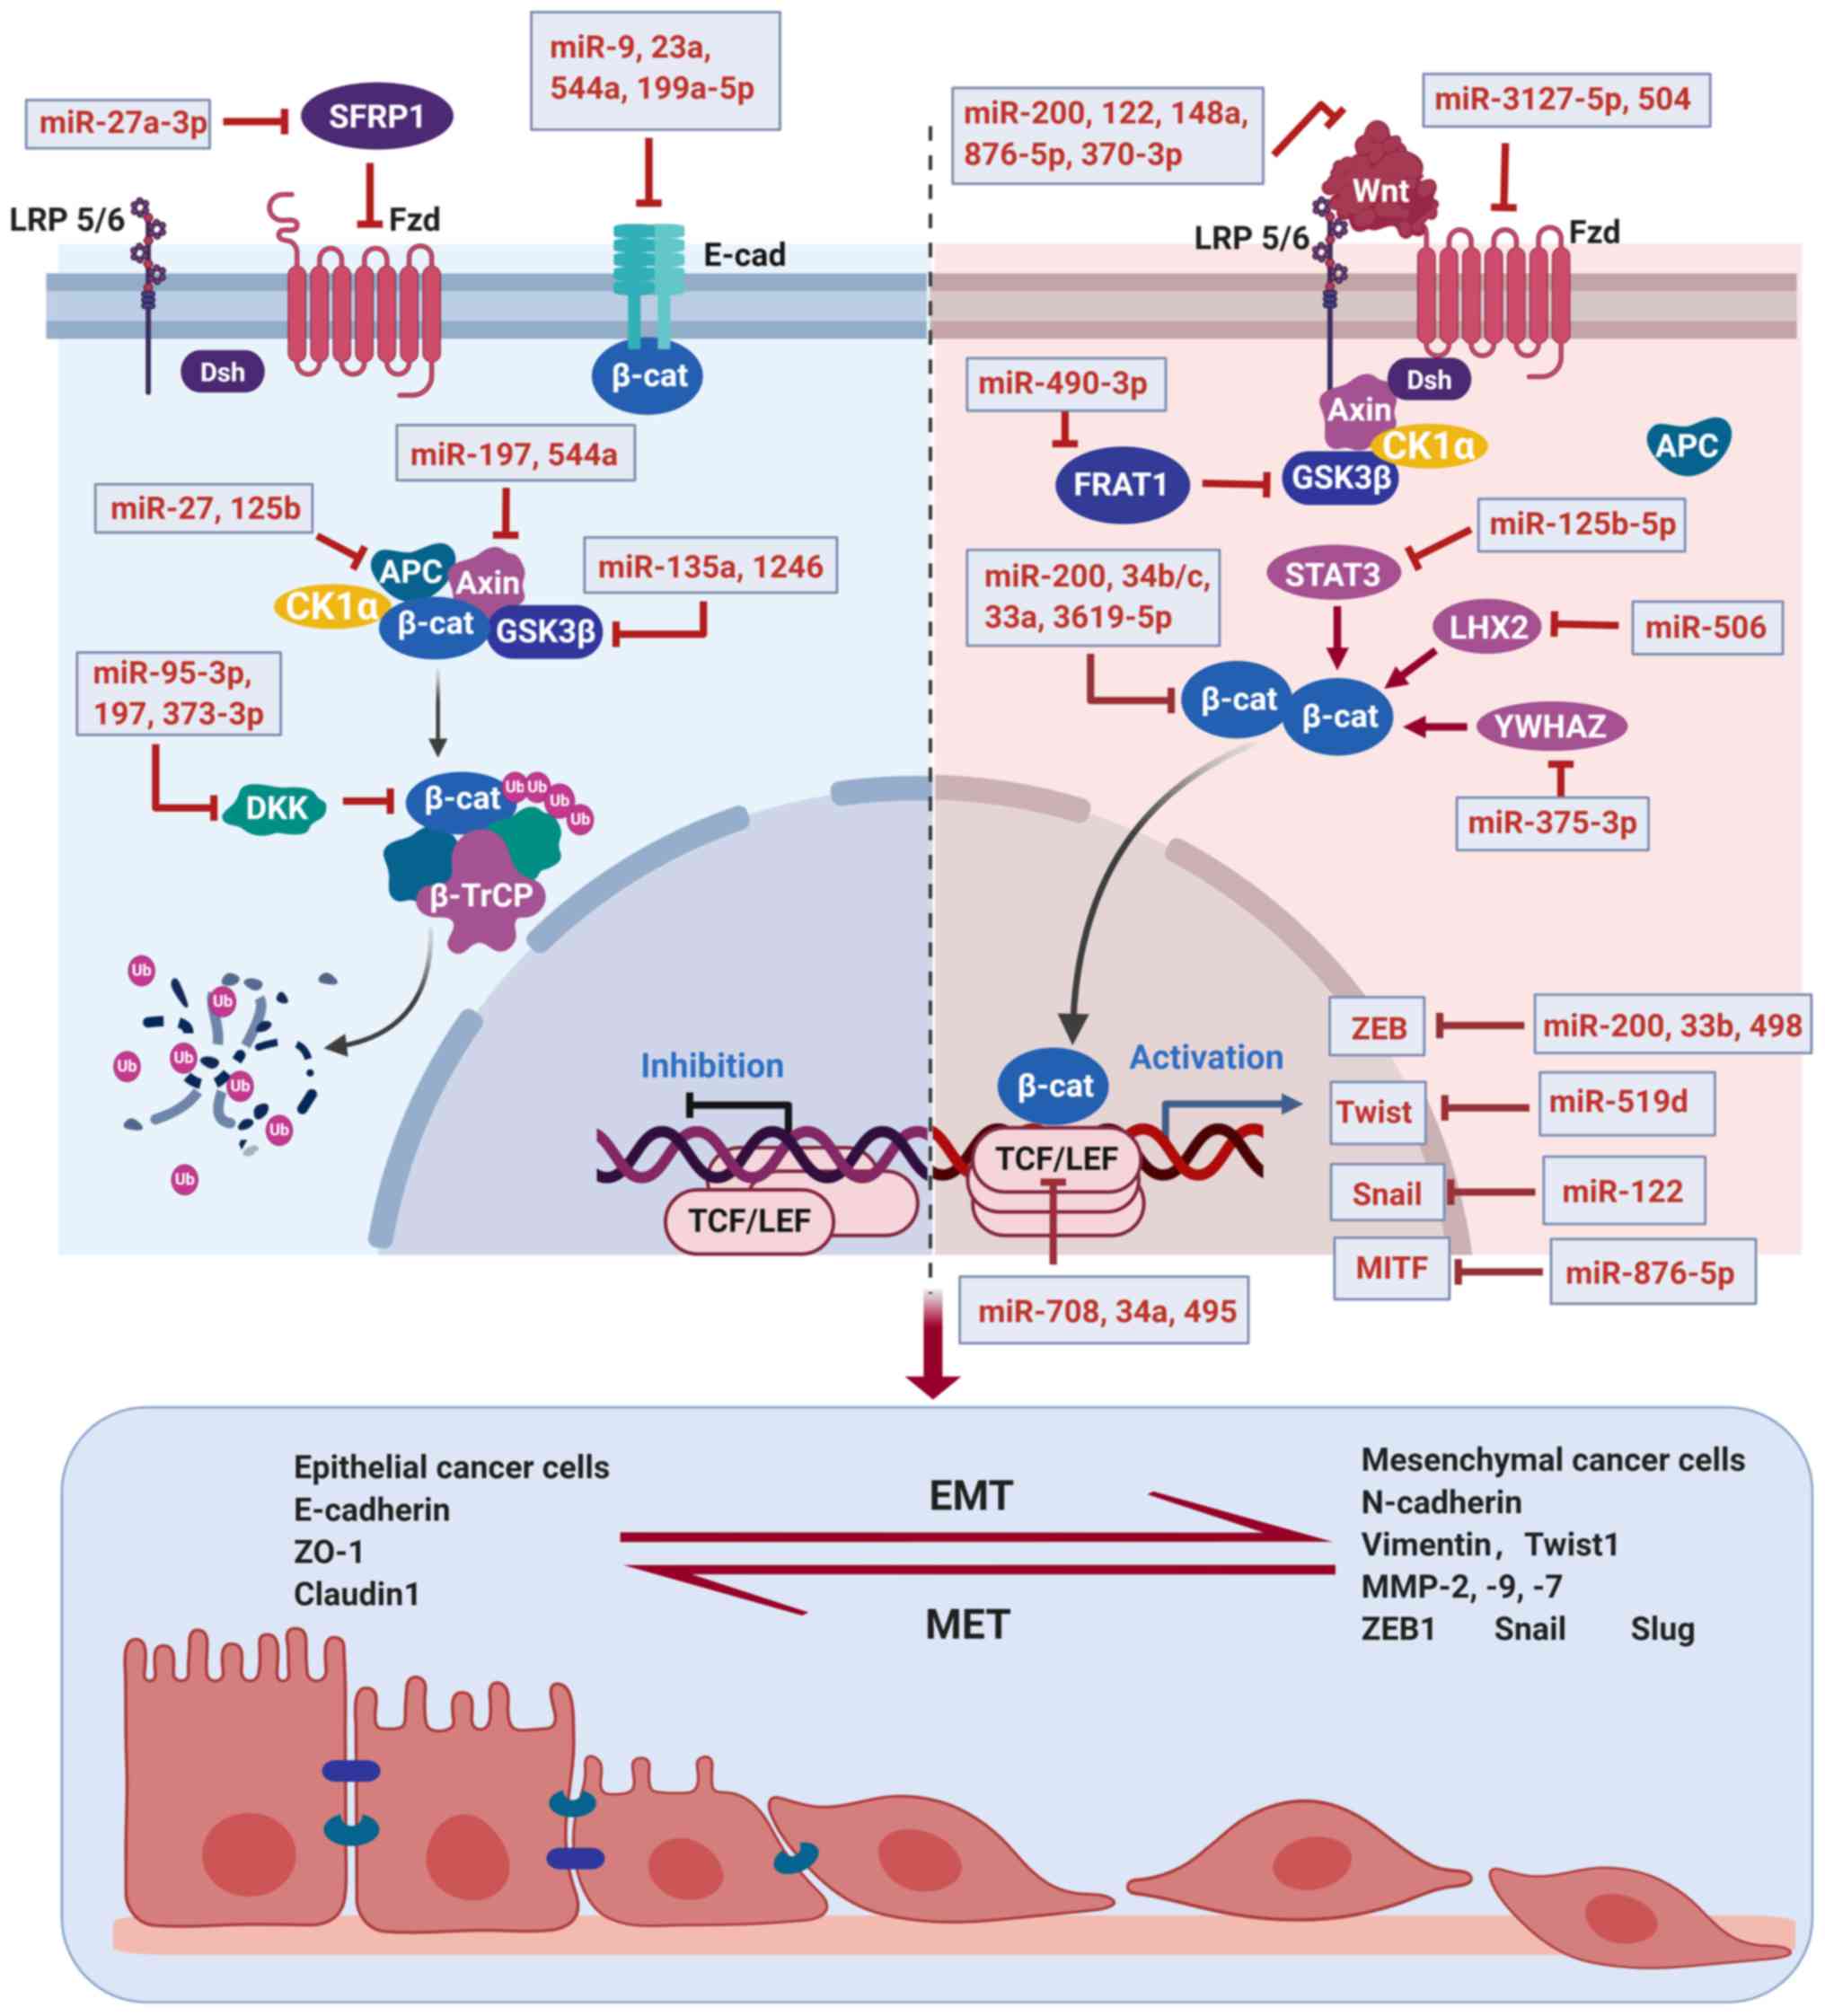 Micrornas Target The Wnt B Catenin Signaling Pathway To Regulate Epithelial Mesenchymal Transition In Cancer Review